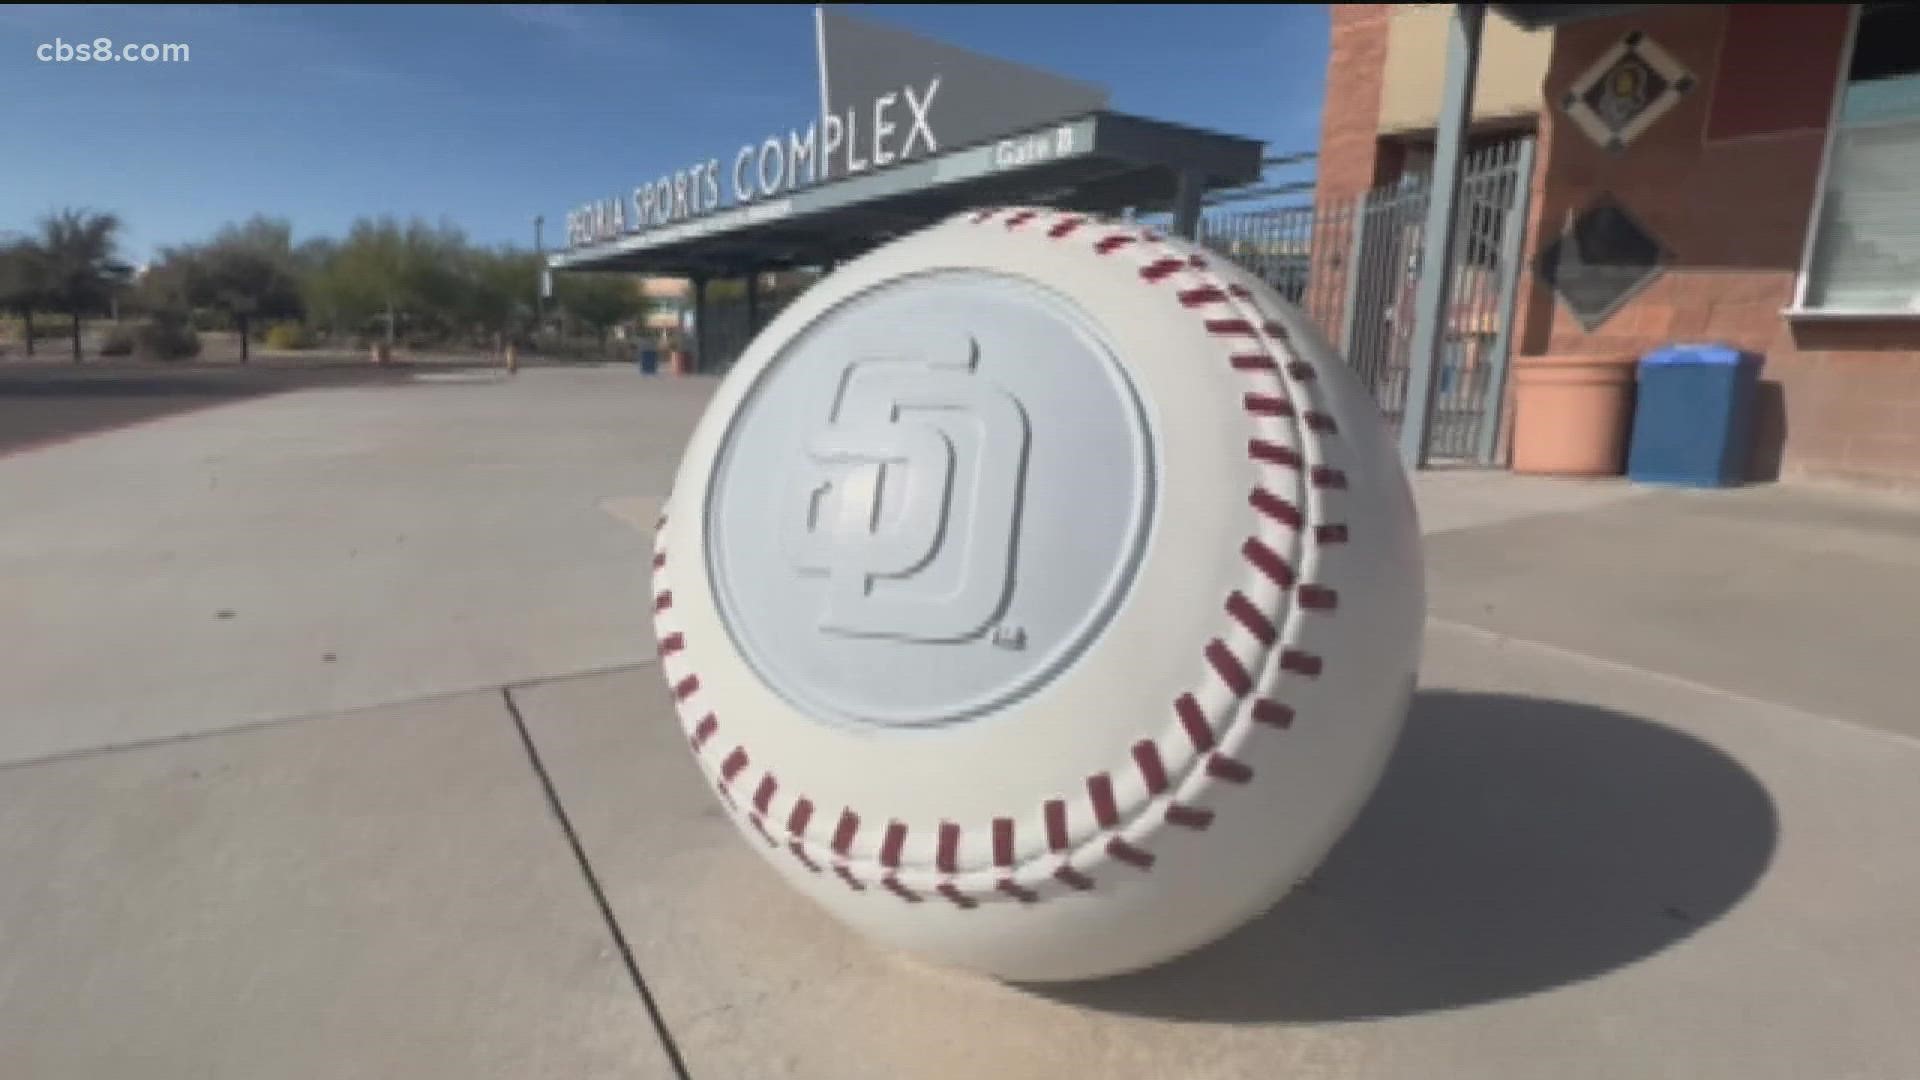 For the San Diego Padres, their home for the next couple of weeks will be in Peoria, Arizona.